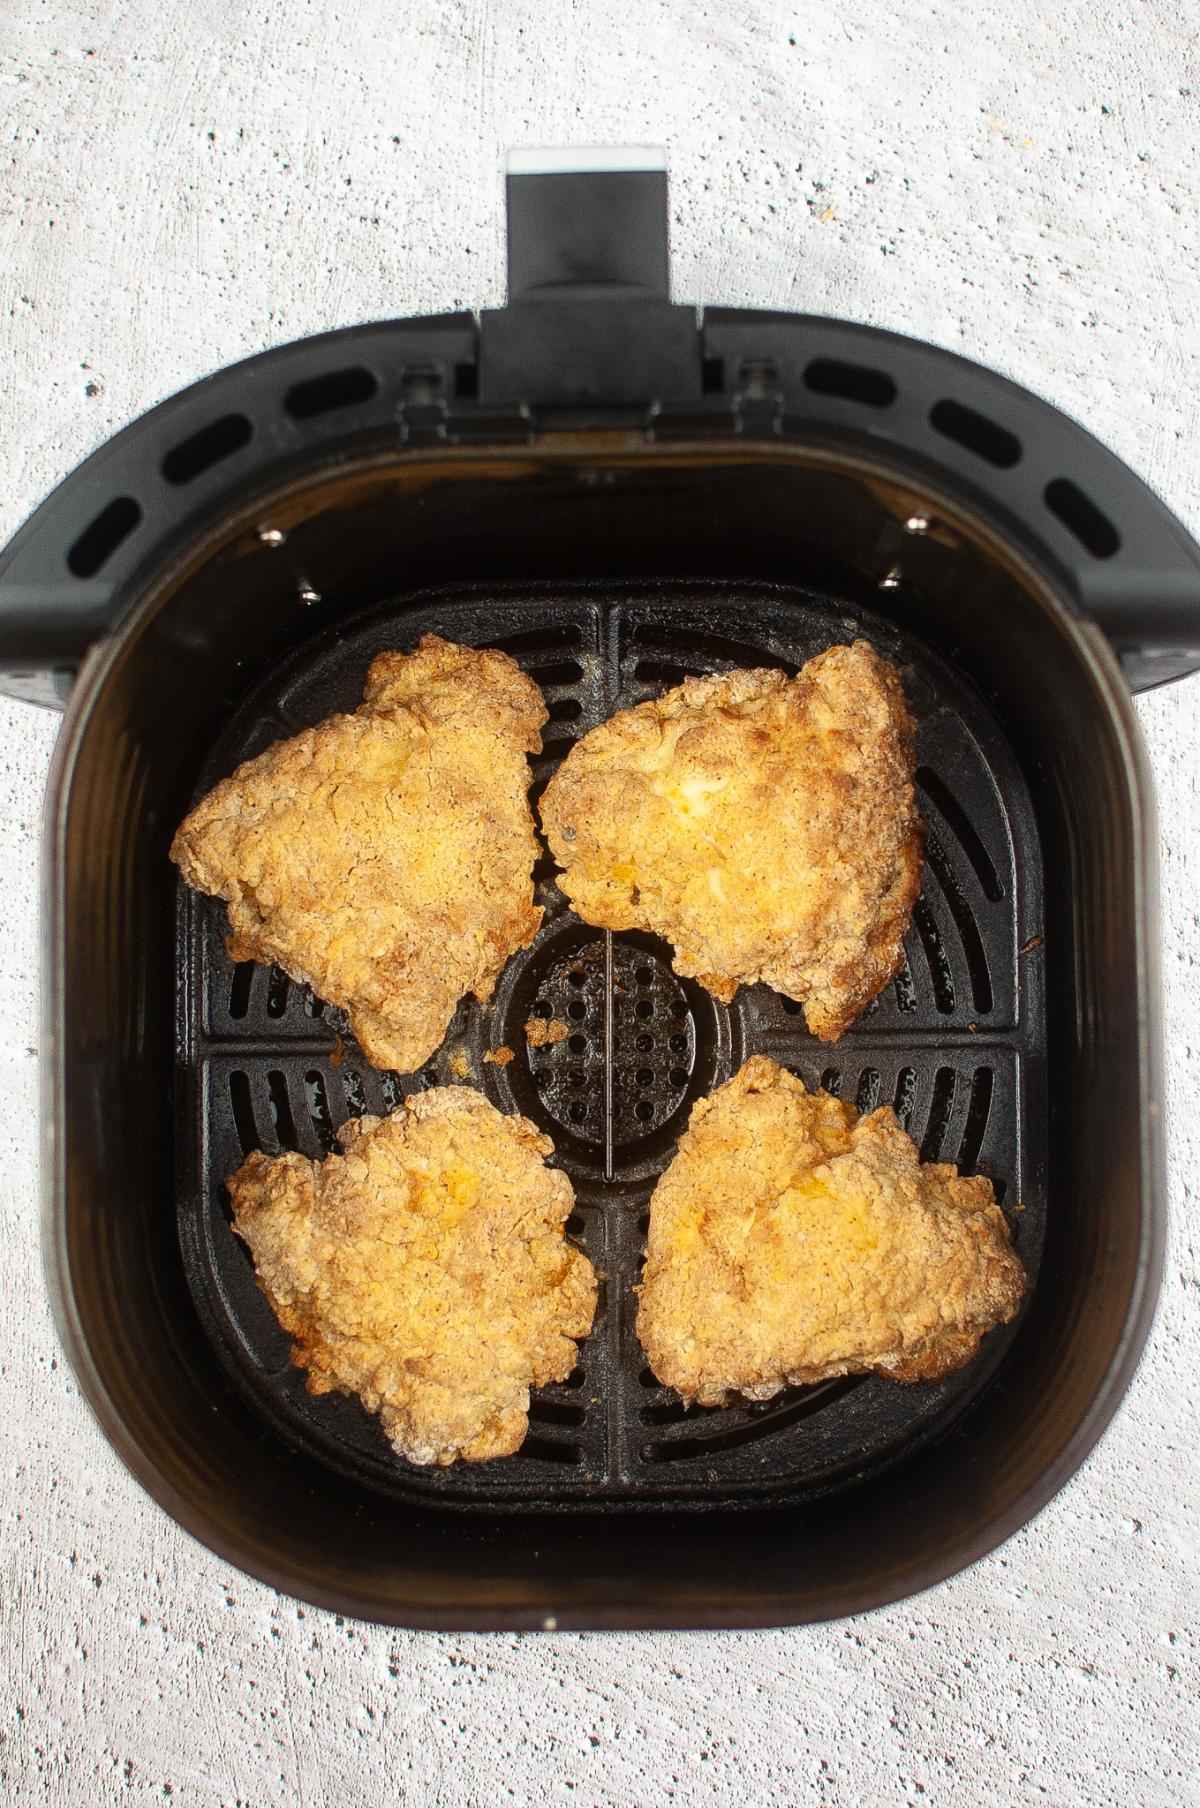 Cooked chicken breast inside the Air Fryer.